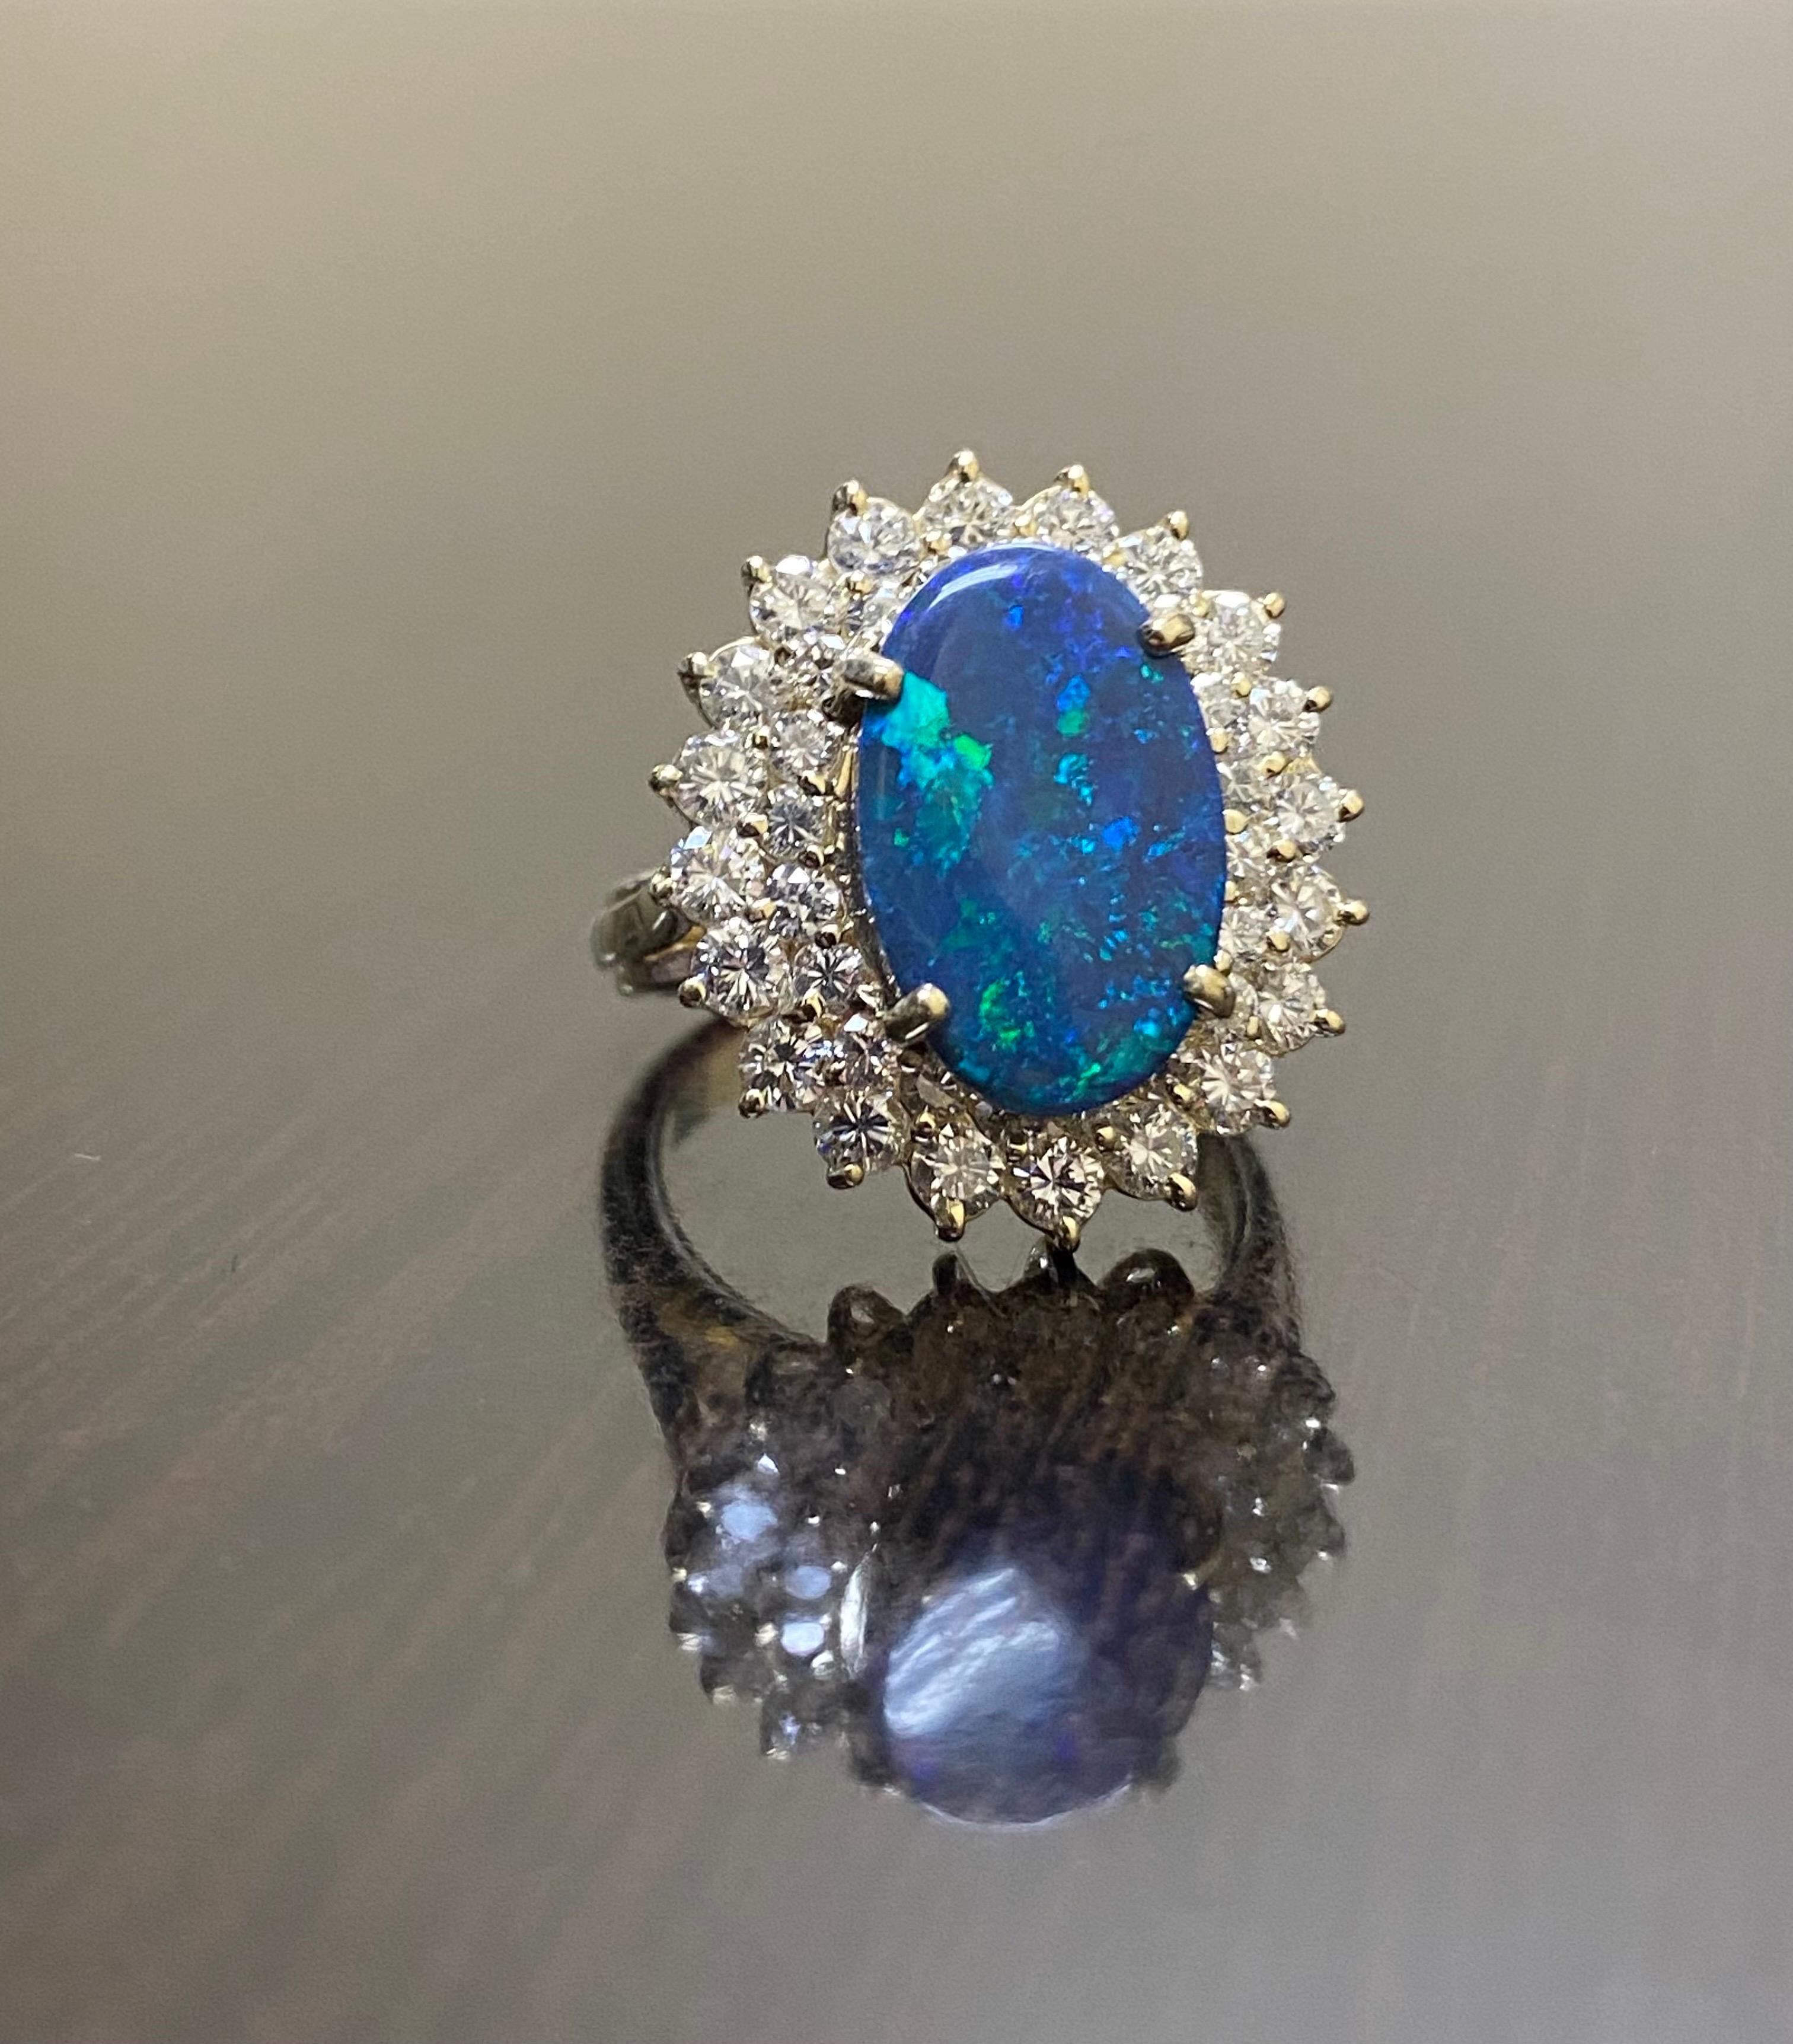 DeKara Designs Classic

Metal- 14K Yellow Gold, .583.

Stones- 1 Oval Australian Black Opal 2.65 Carats, 40 Round Diamonds G-H Color VS2 Clarity 1.65 Carats.

Size- 6, could be sized up or down at no additional cost.

Featuring a DeKara Design